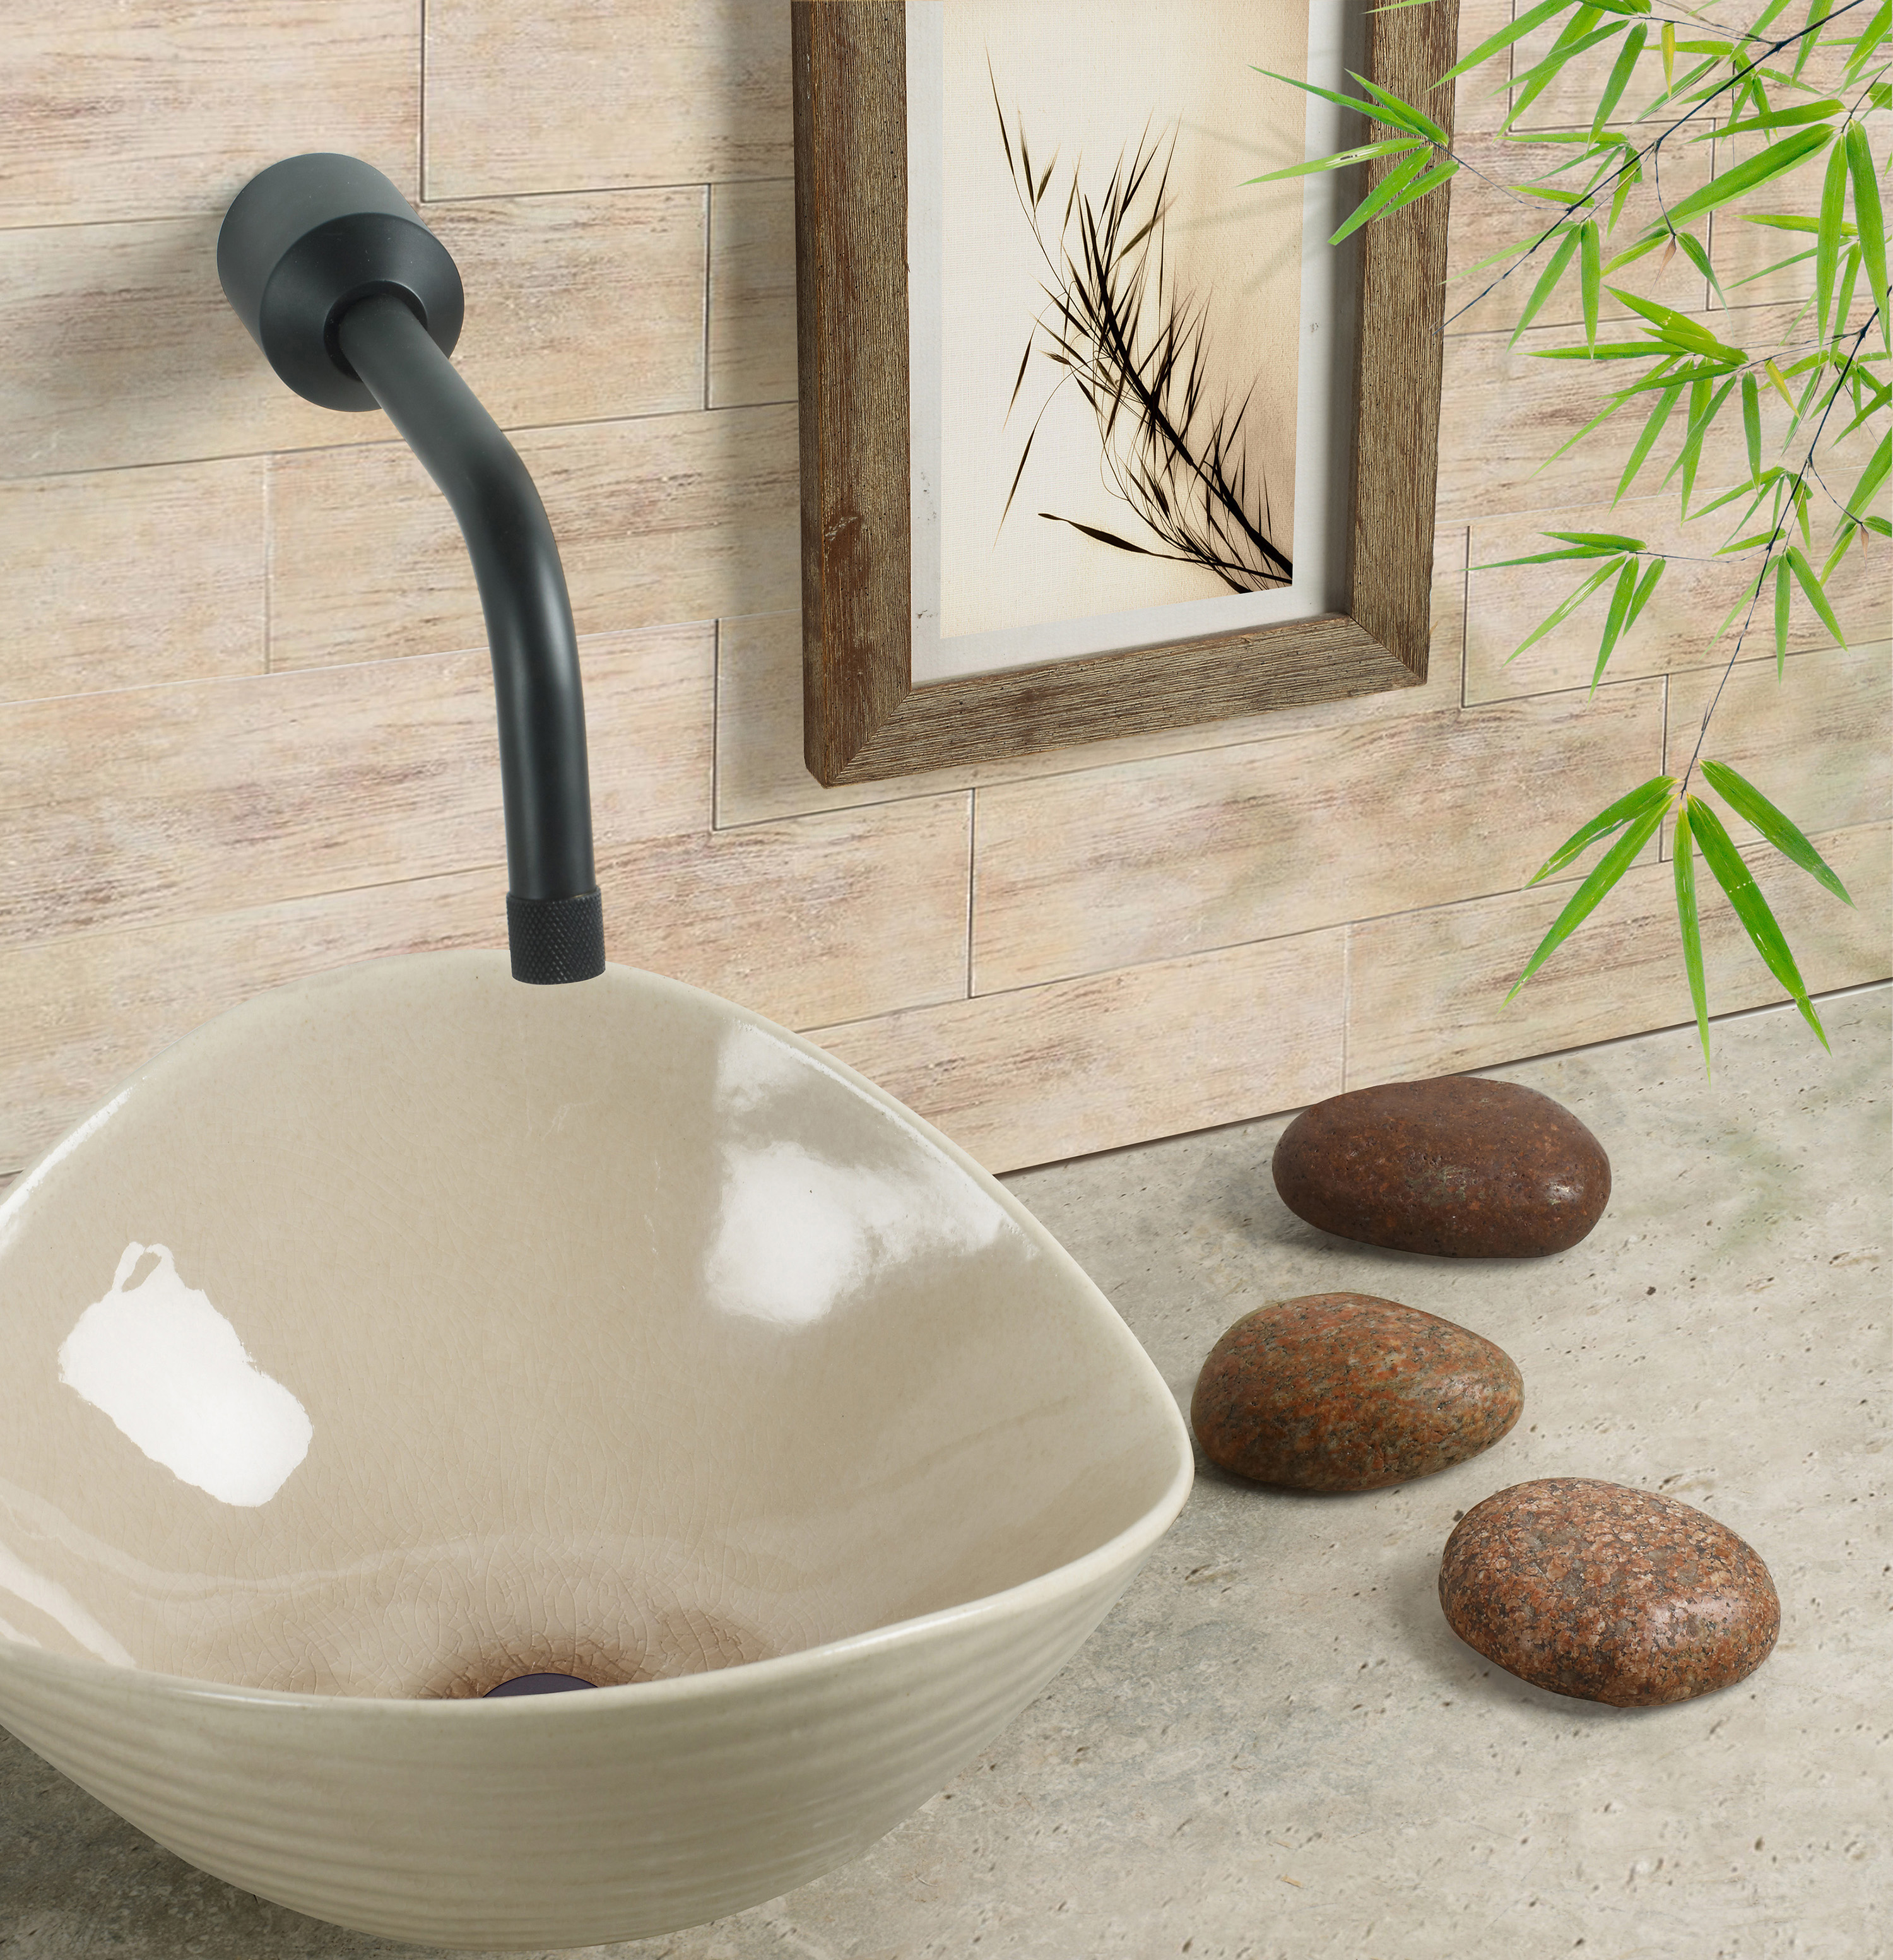 The Zen Collection by Watermark Designs faucet uses rare earth magnet technology to attach stone handles.